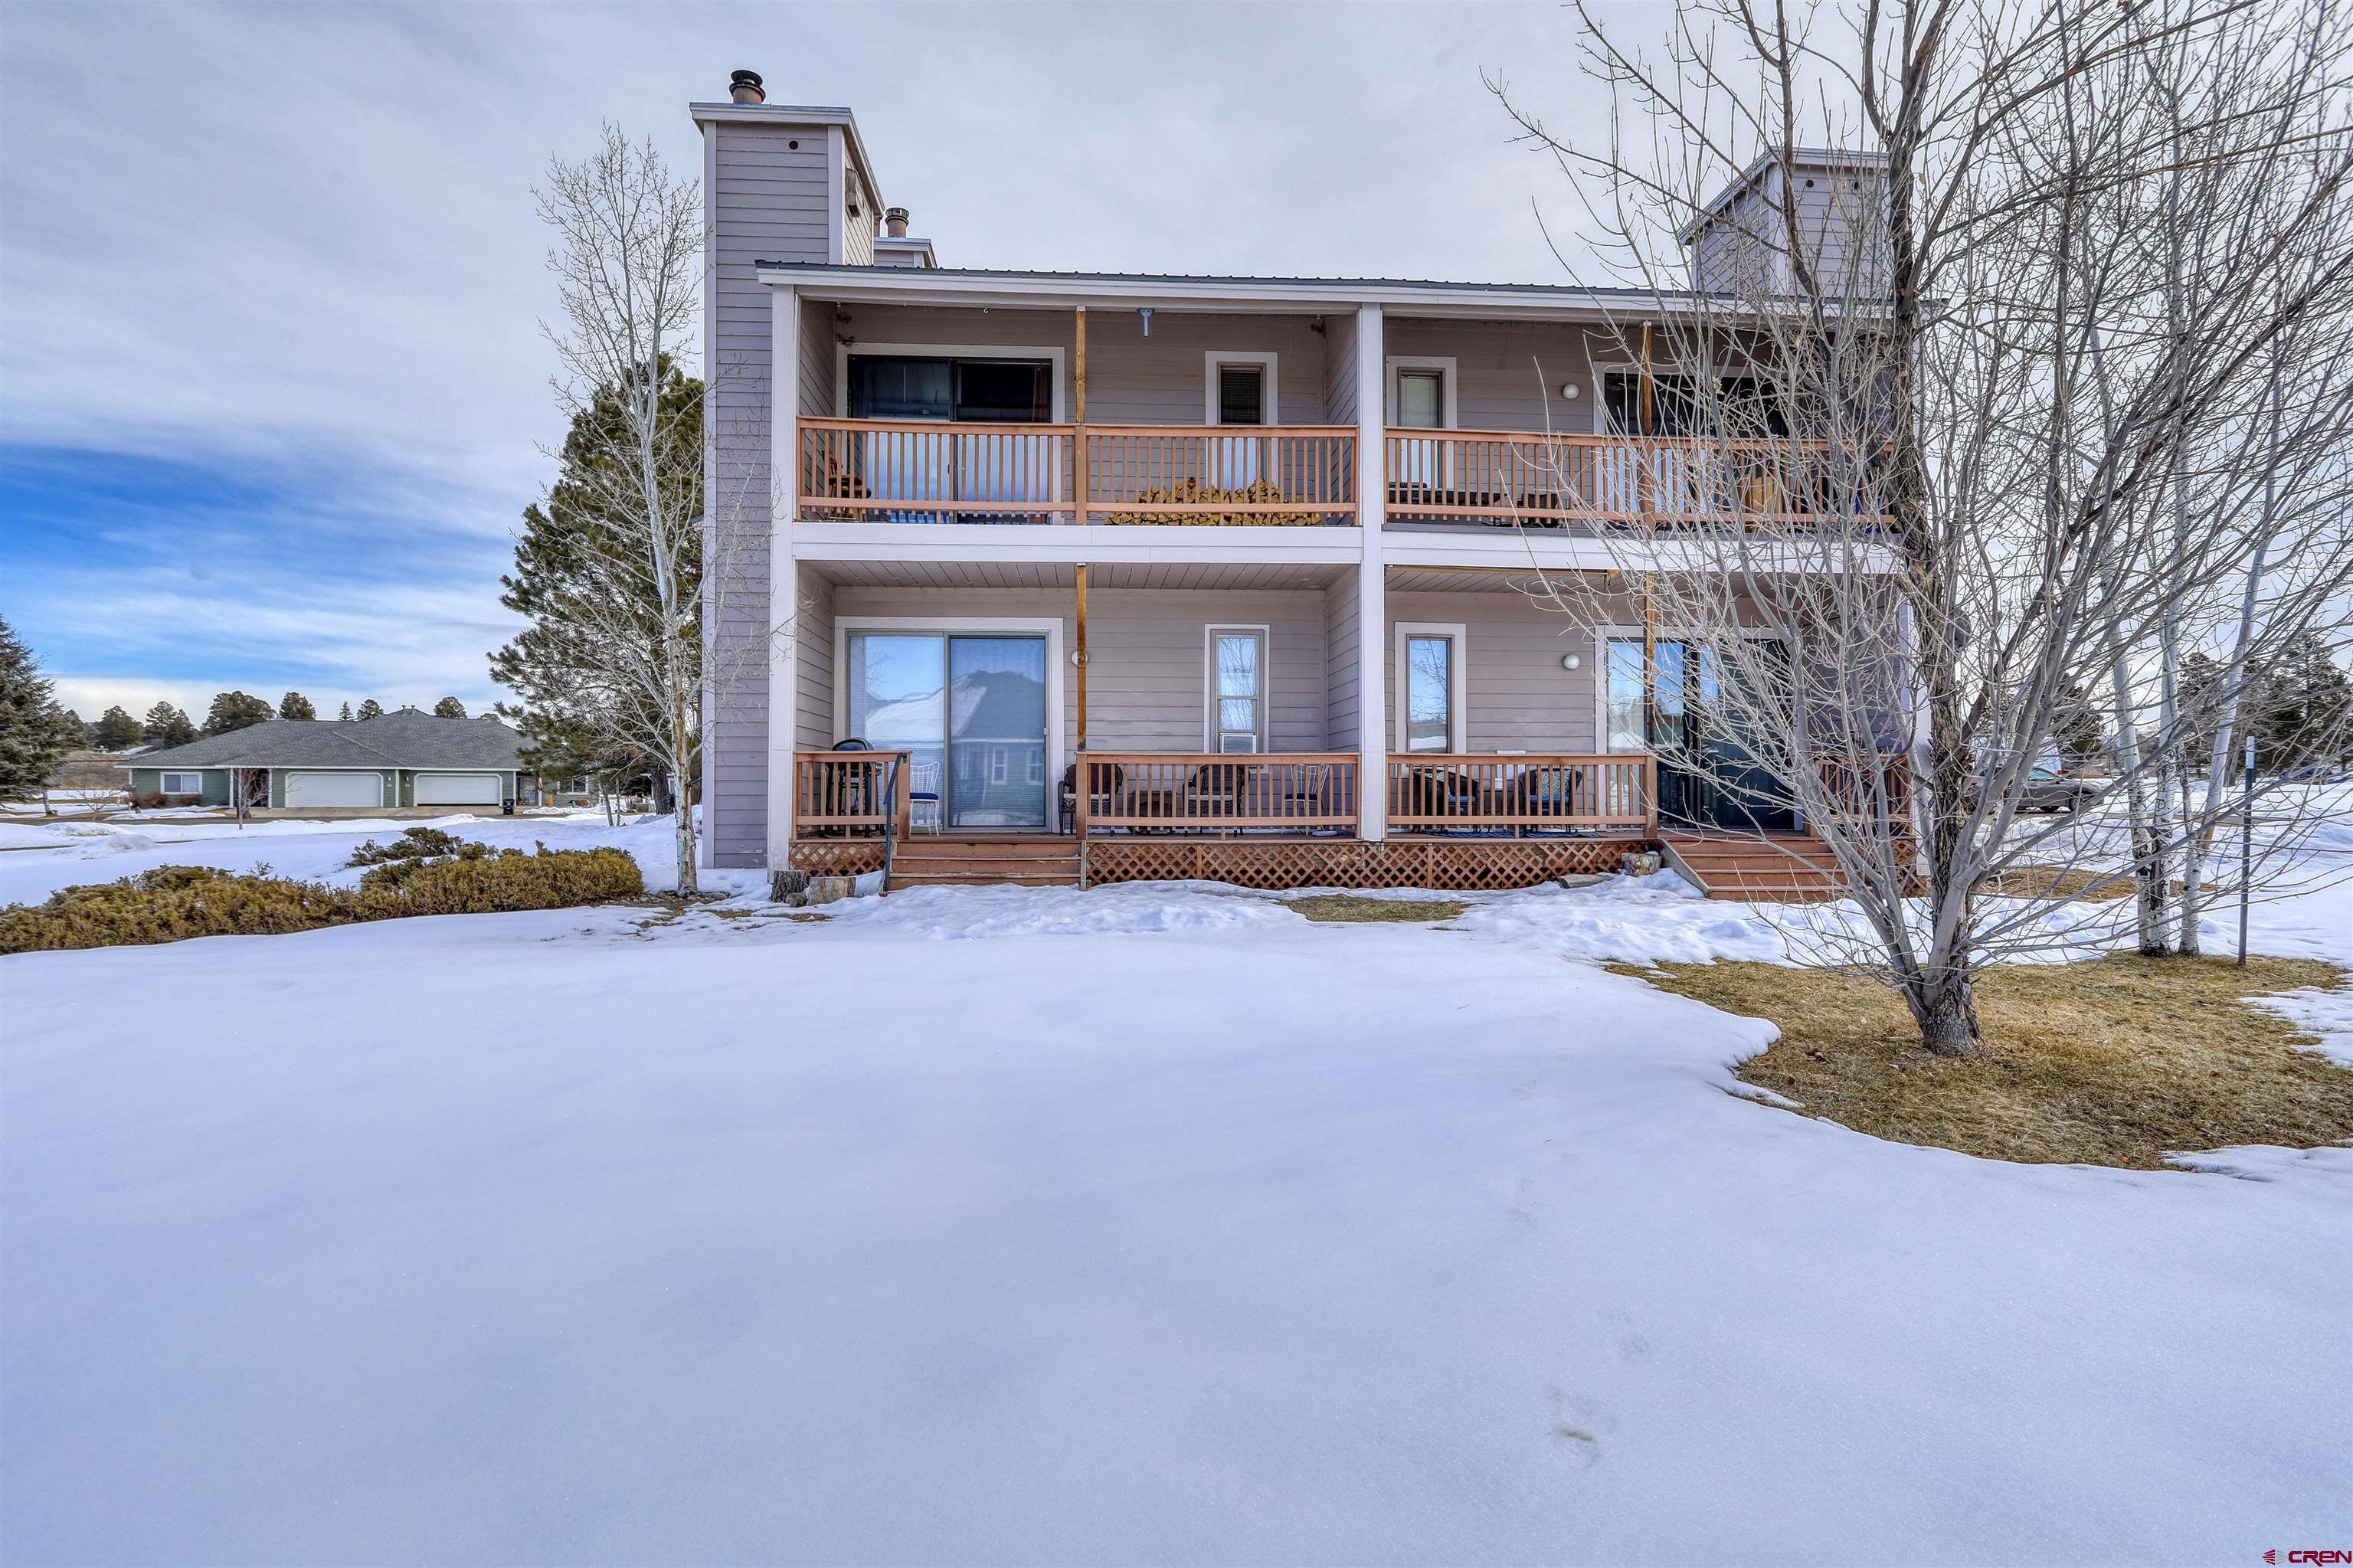 89 Valley View Drive, #3197, Pagosa Springs, CO 81147 Listing Photo  2